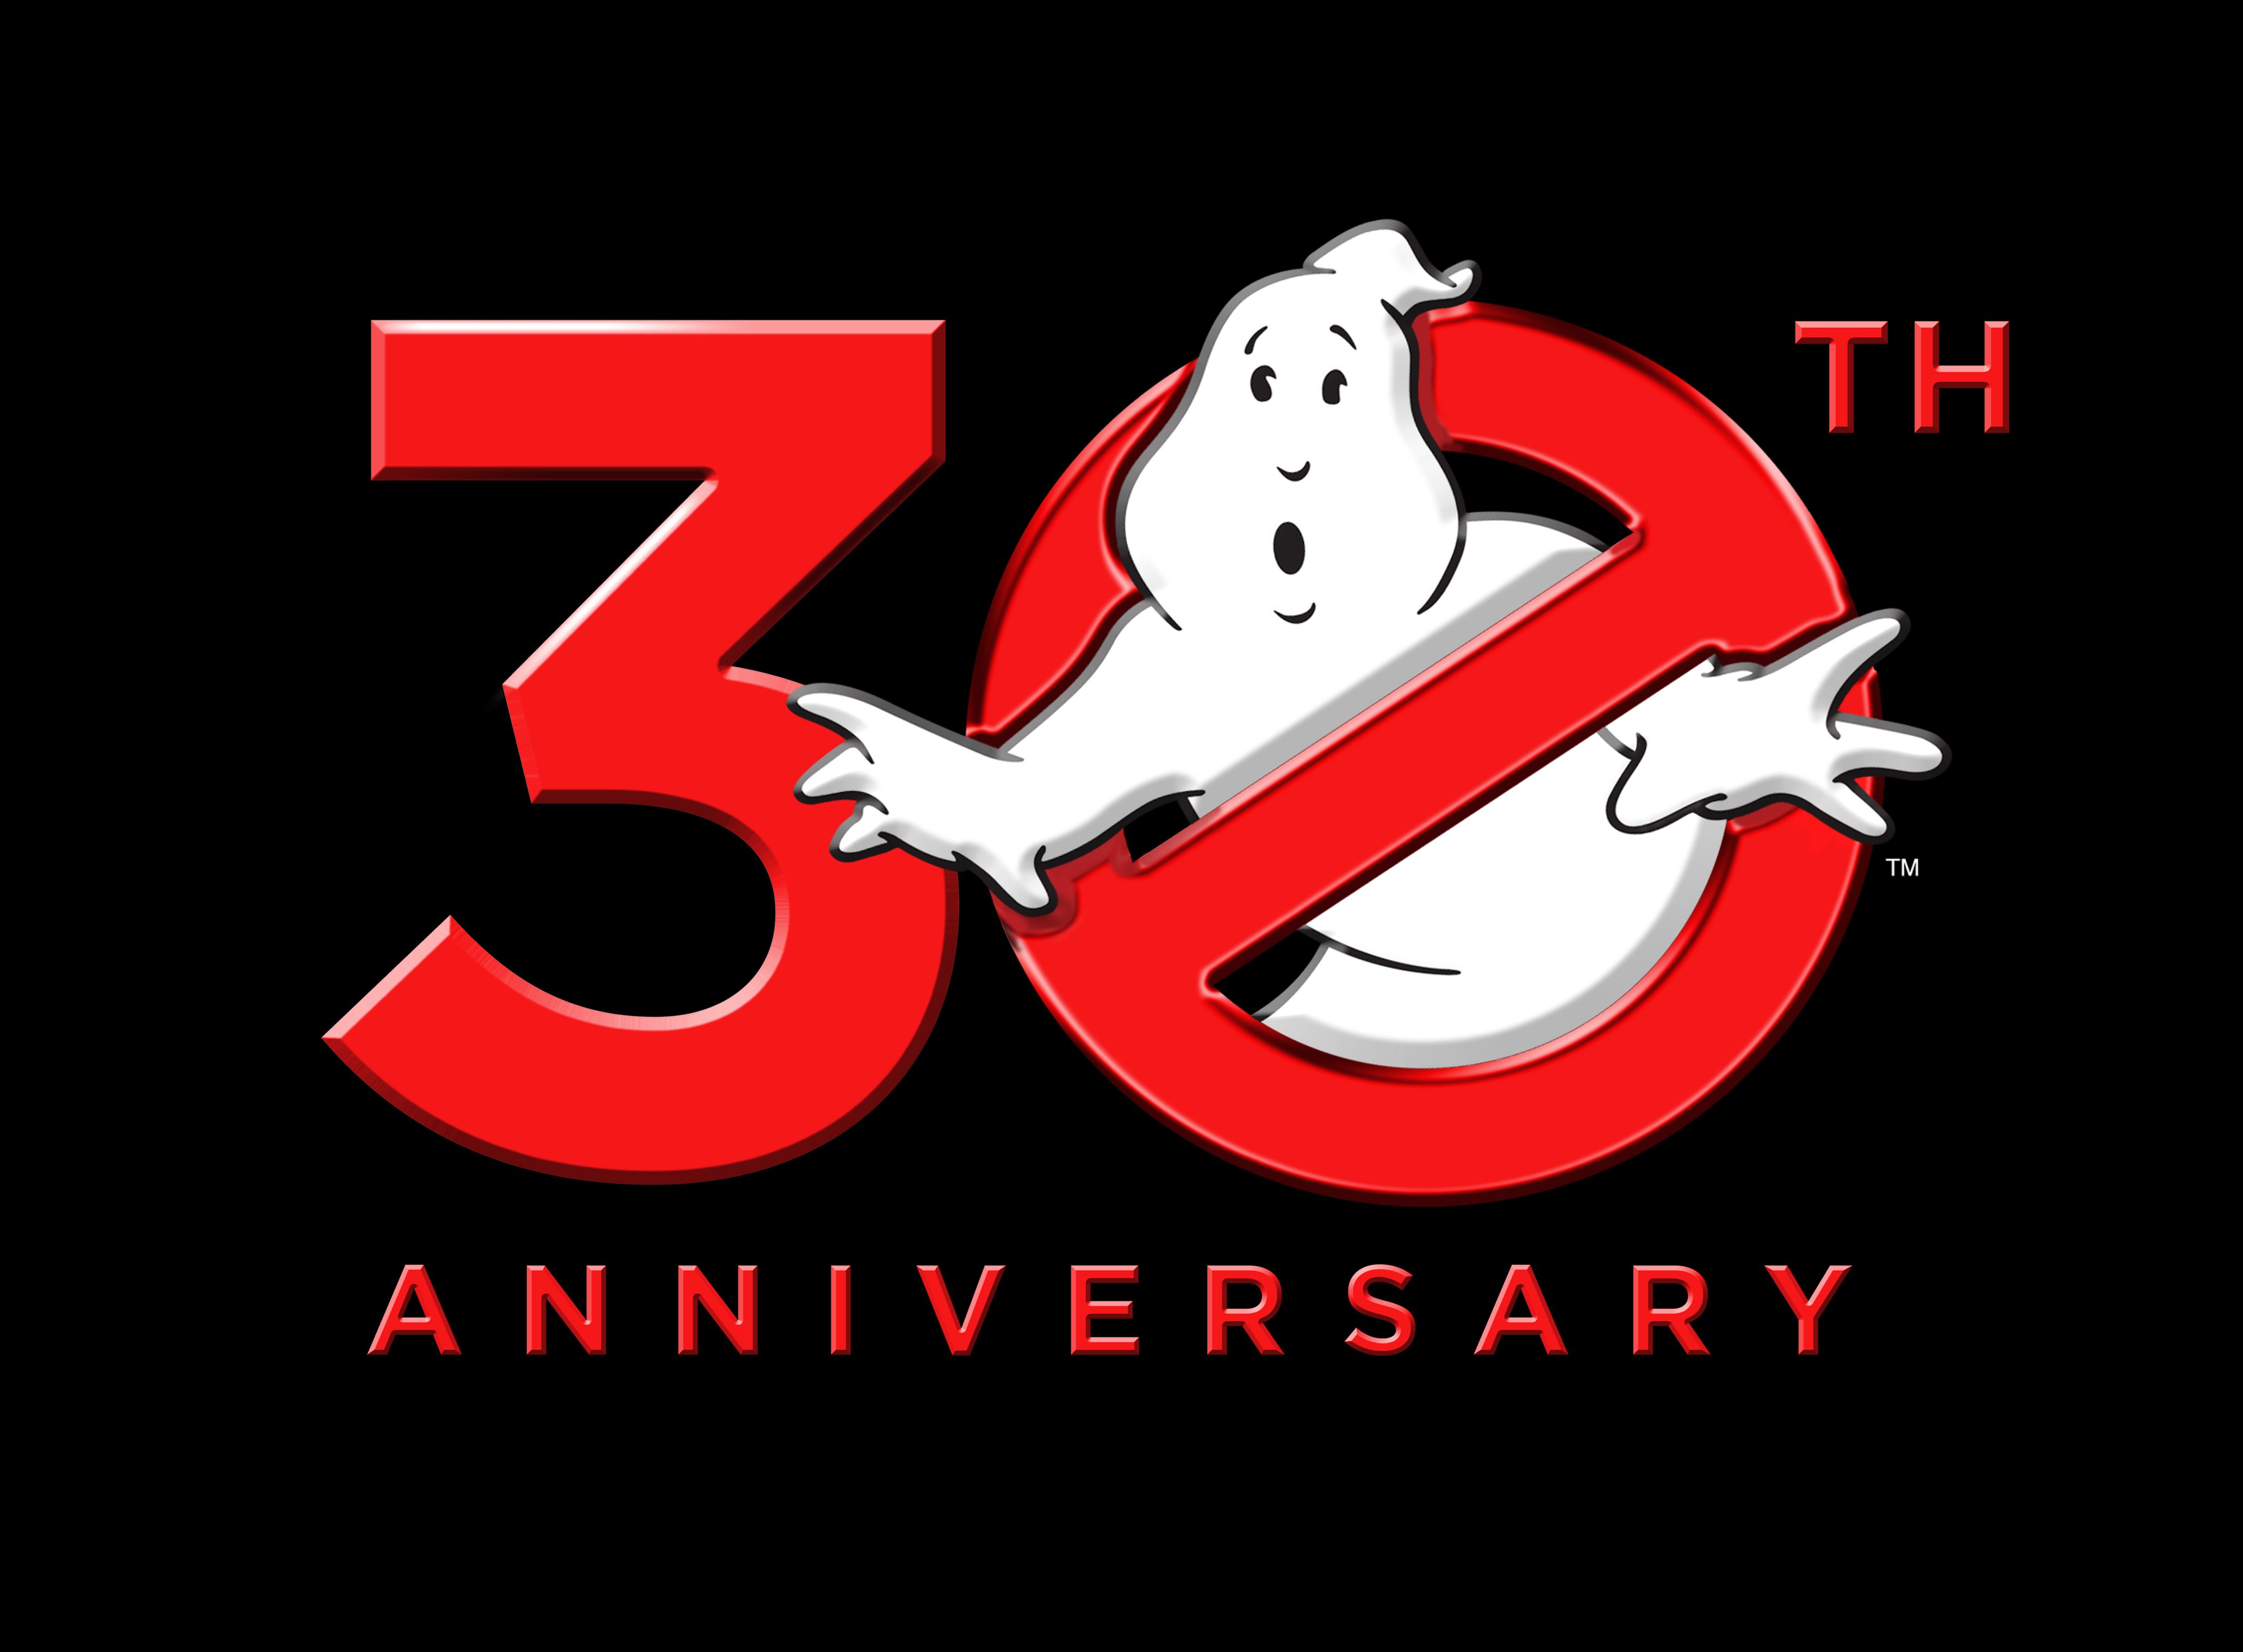 ghostbusters, Action, Adventure, Supernatural, Comedy, Ghost Wallpaper